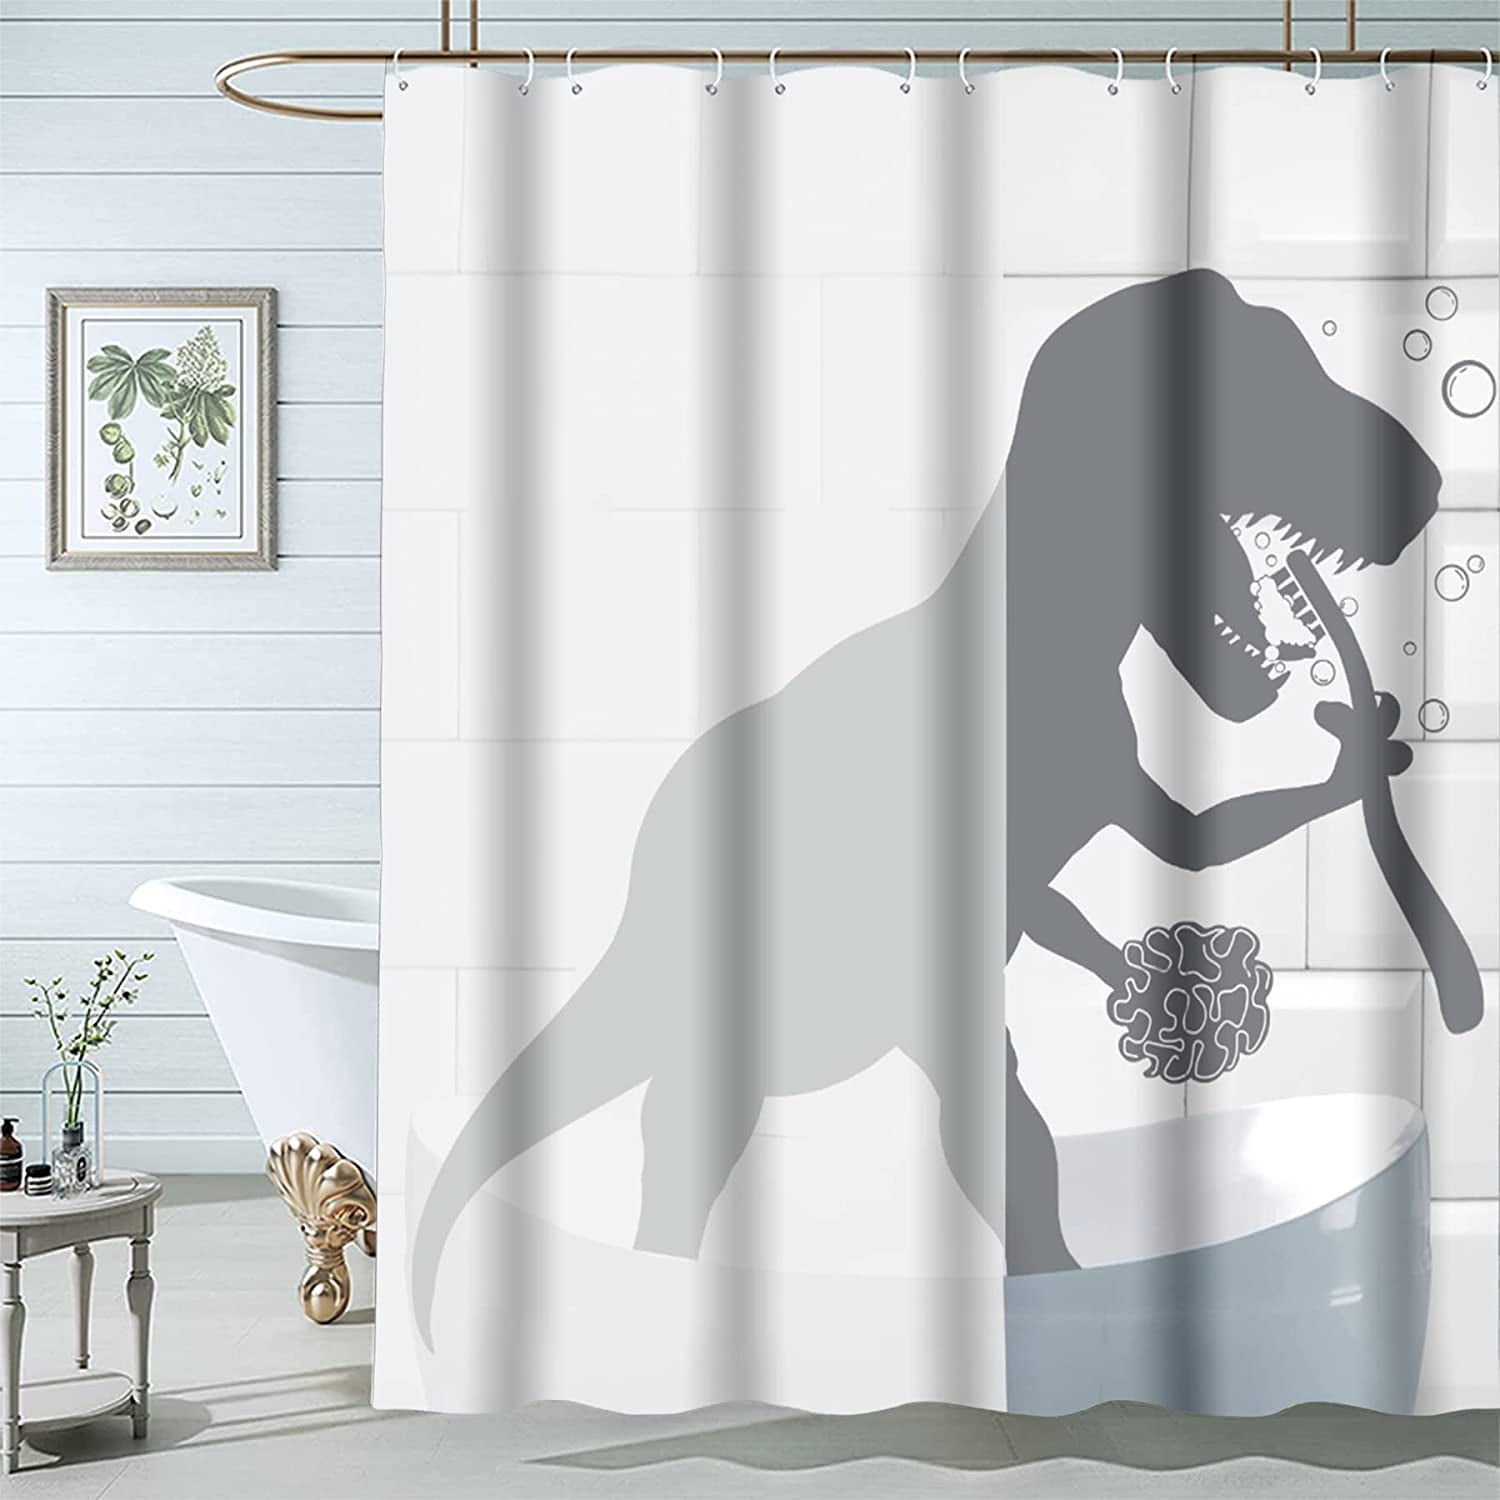  Vercico Sports Shower Curtain Set for Bathroom Decor Shower  Curtain,Boy Football Curtain for Bathroom Showers and Bathtubs, 72 x 72  inches Long, Hooks Included : Home & Kitchen